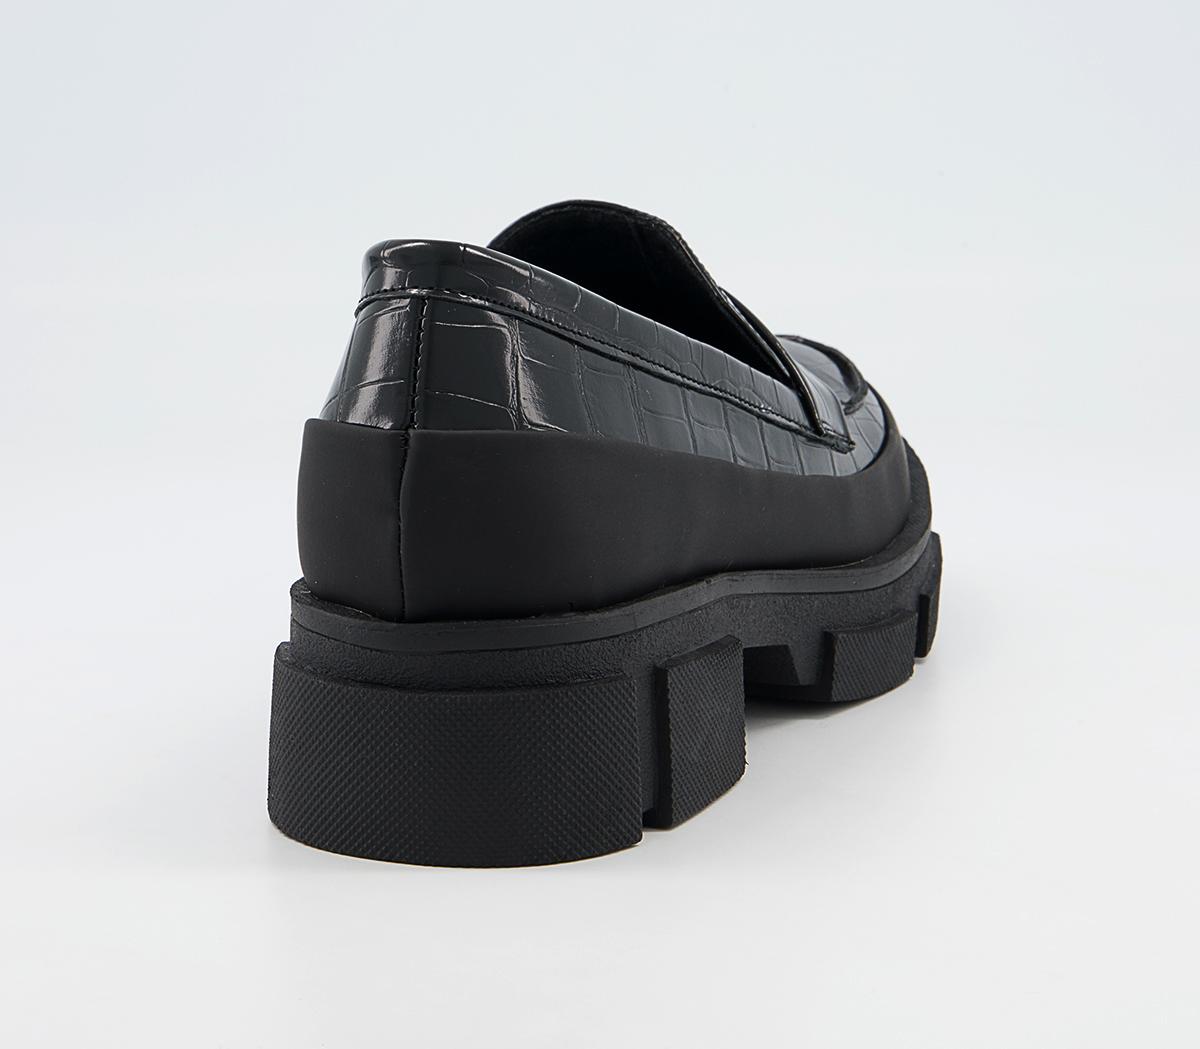 OFFICE Formation Chunky Sole Loafers Black Croc - Women’s Loafers